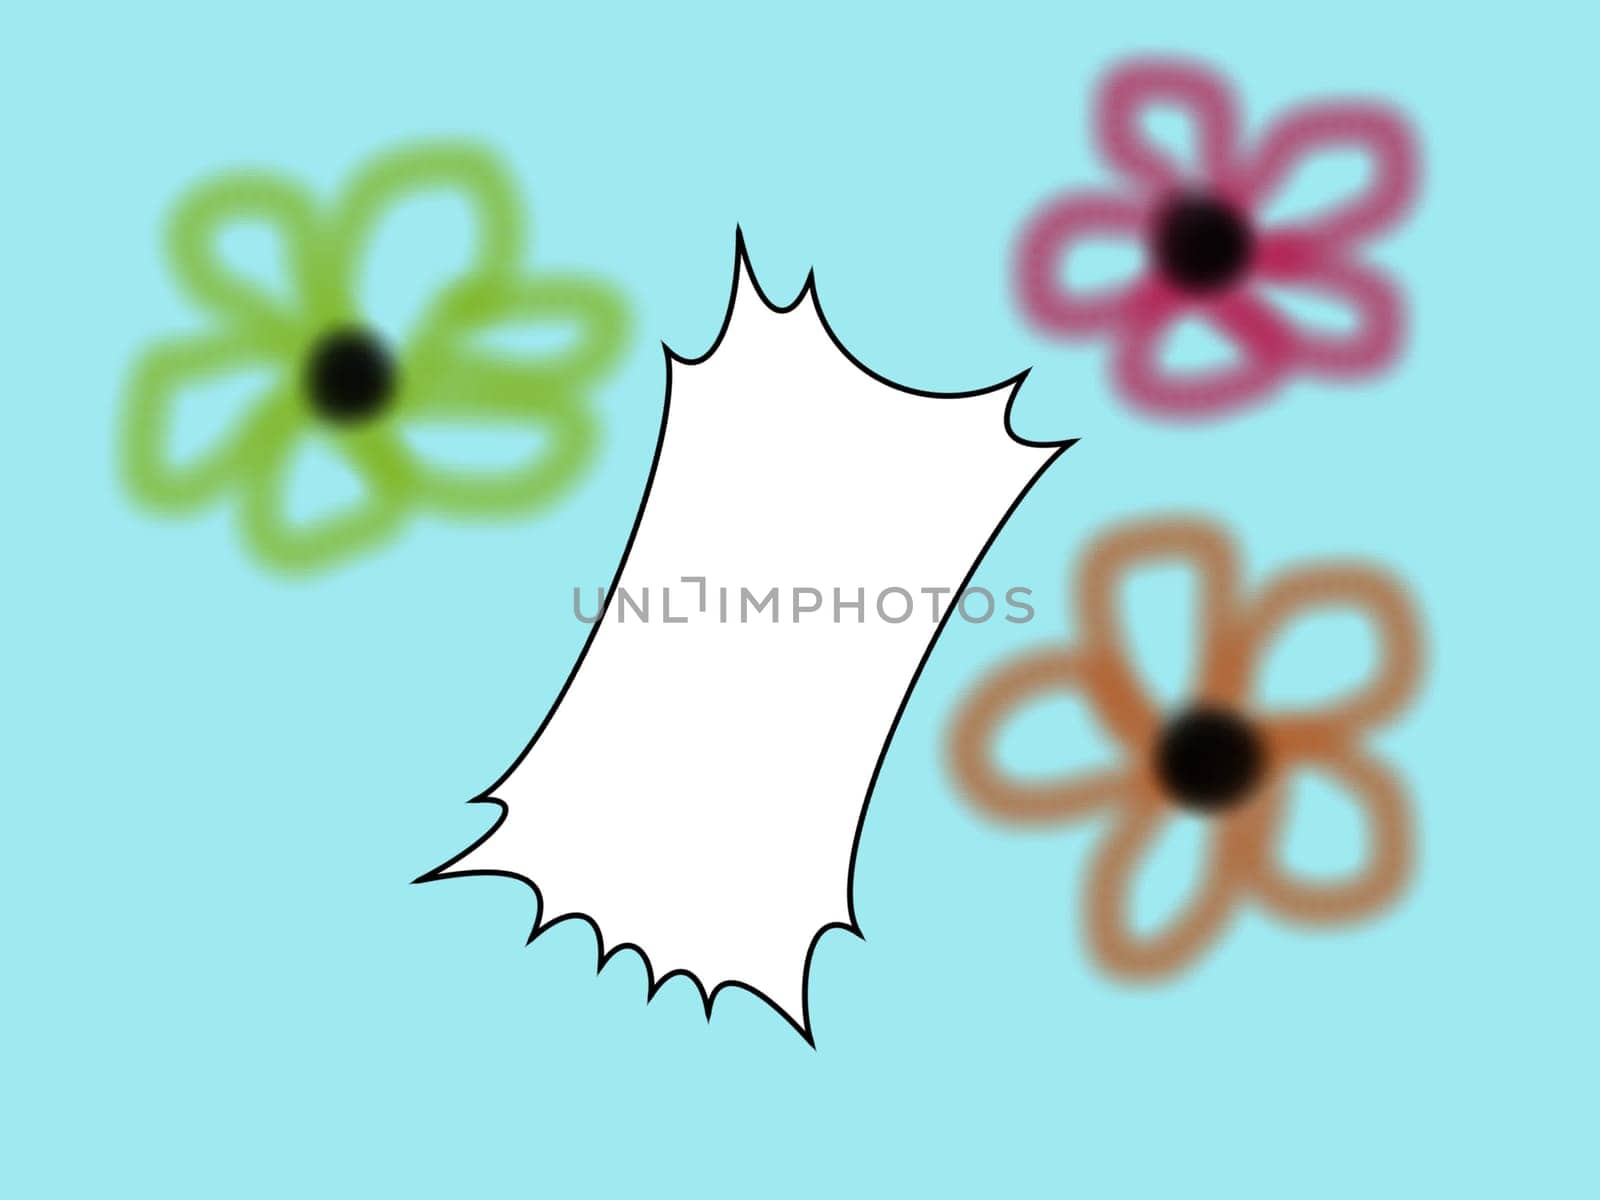 Illustration light Blue background with Three flowers and text bubble. High quality illustration